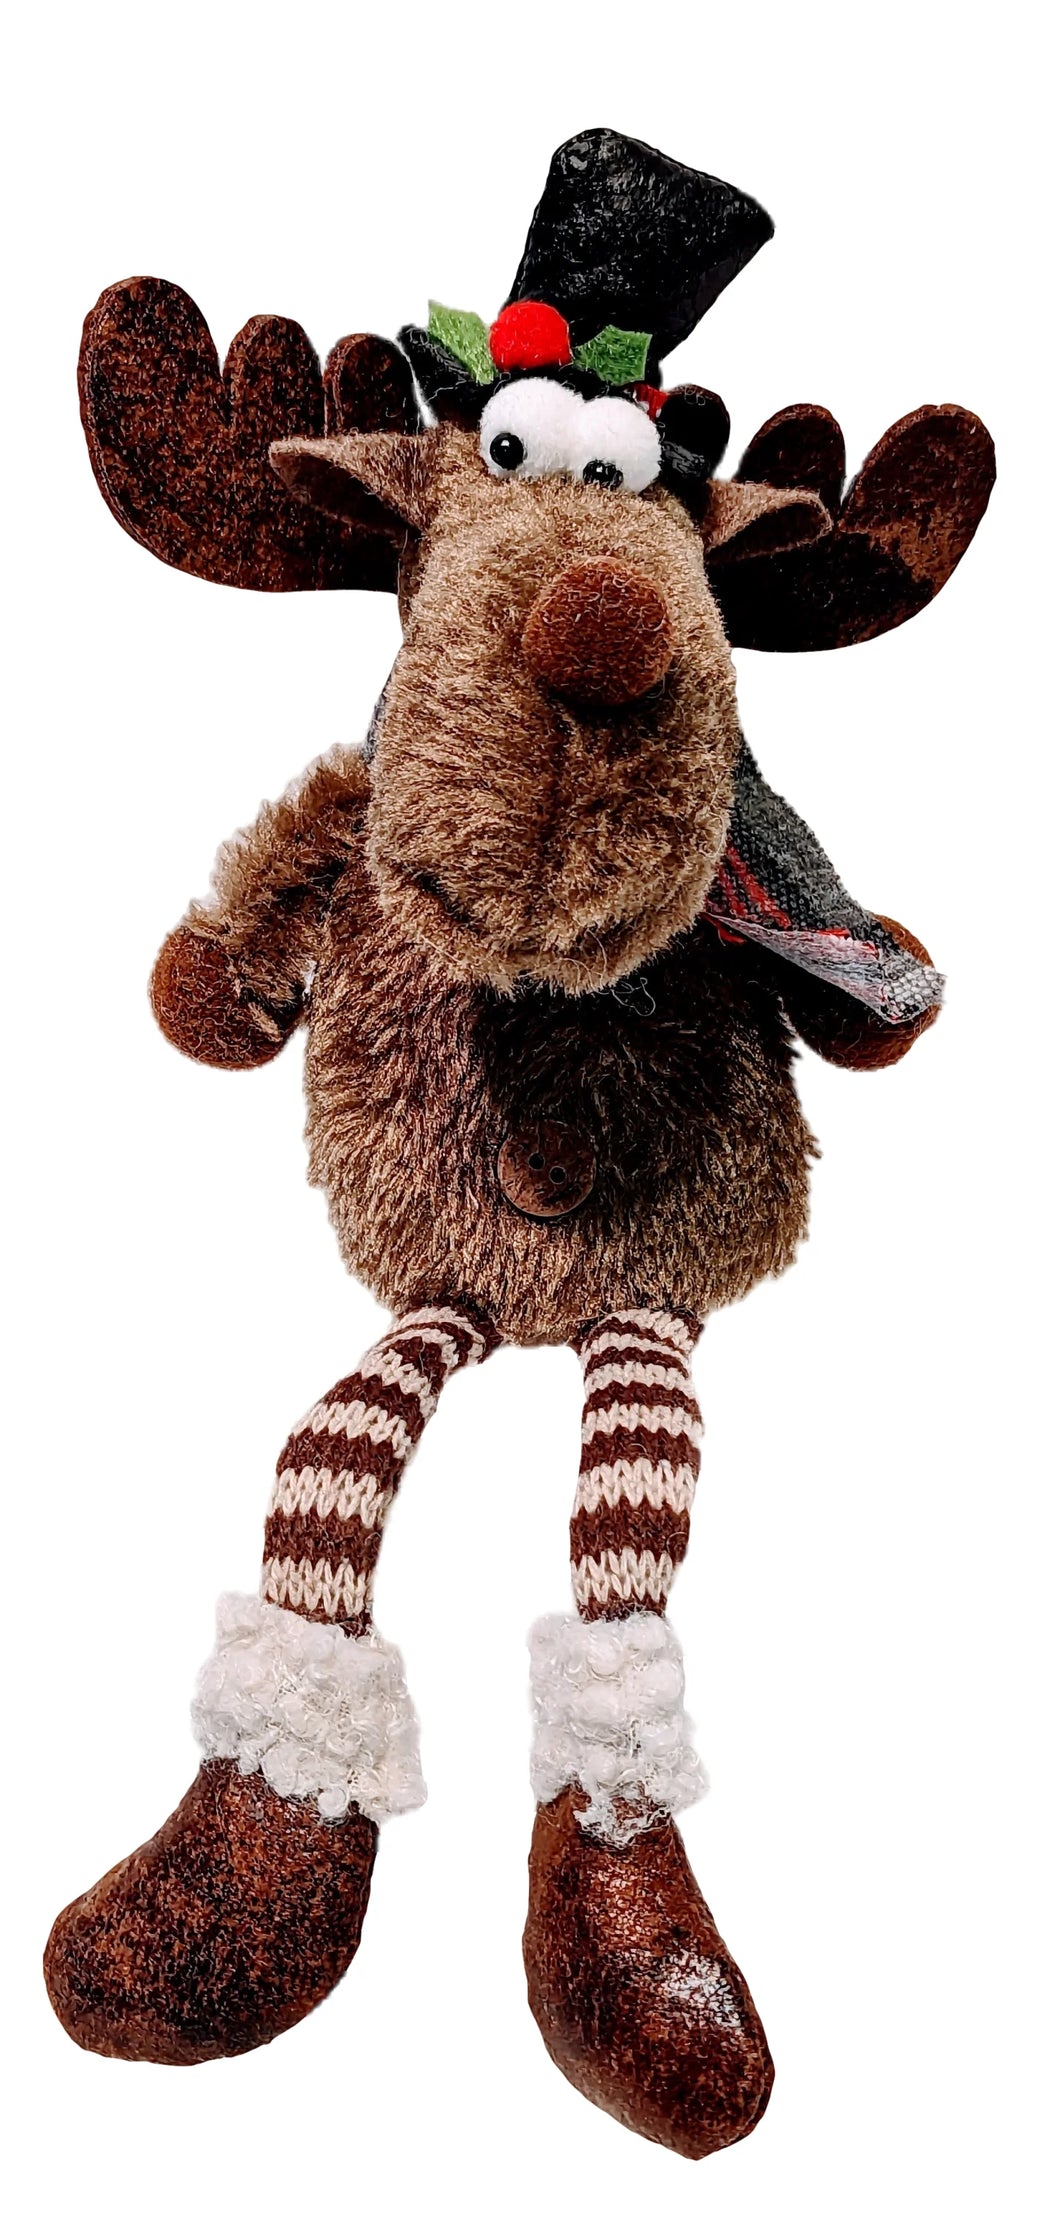 Plush Moose Shelf Sitter Wearing Black Hat with Holly & Plaid Scarf